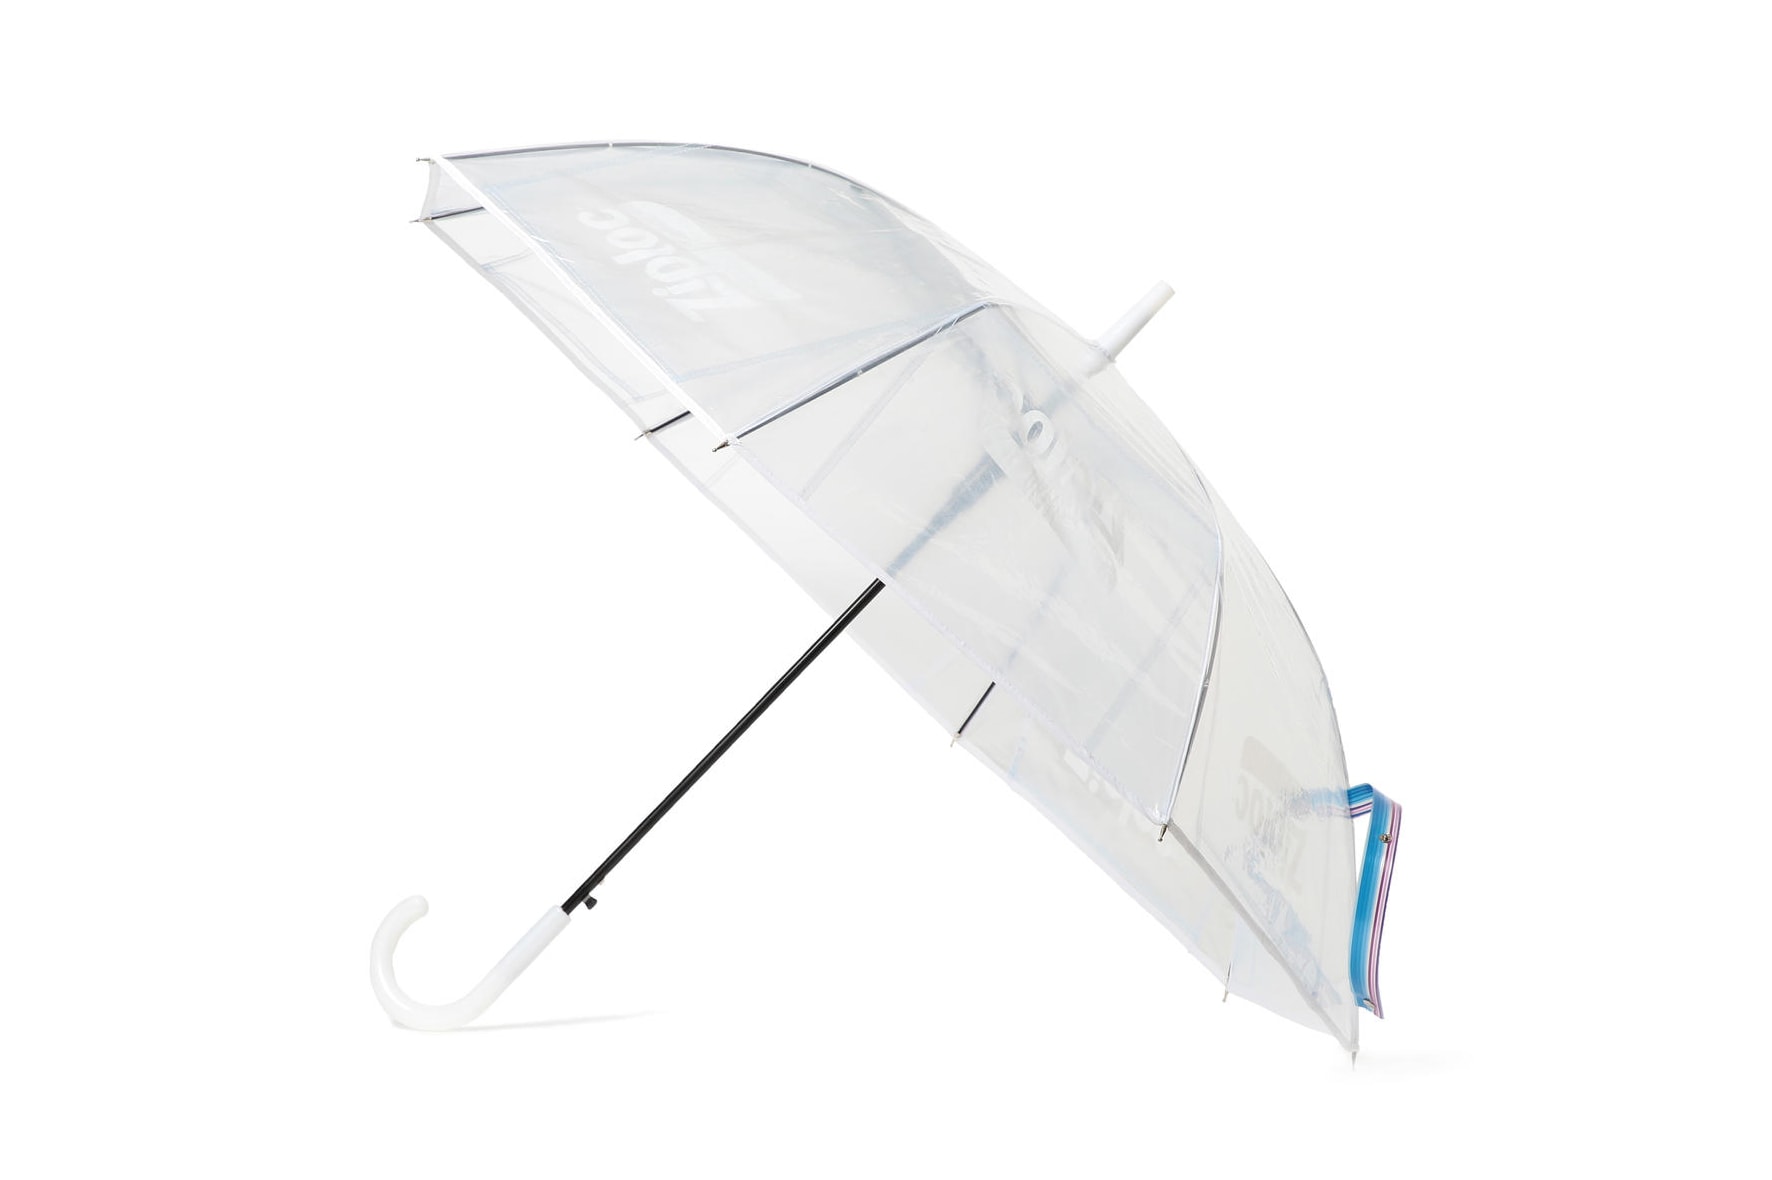 beams couture ray ziploc collaboration bags hats umbrella see through transparent plastic